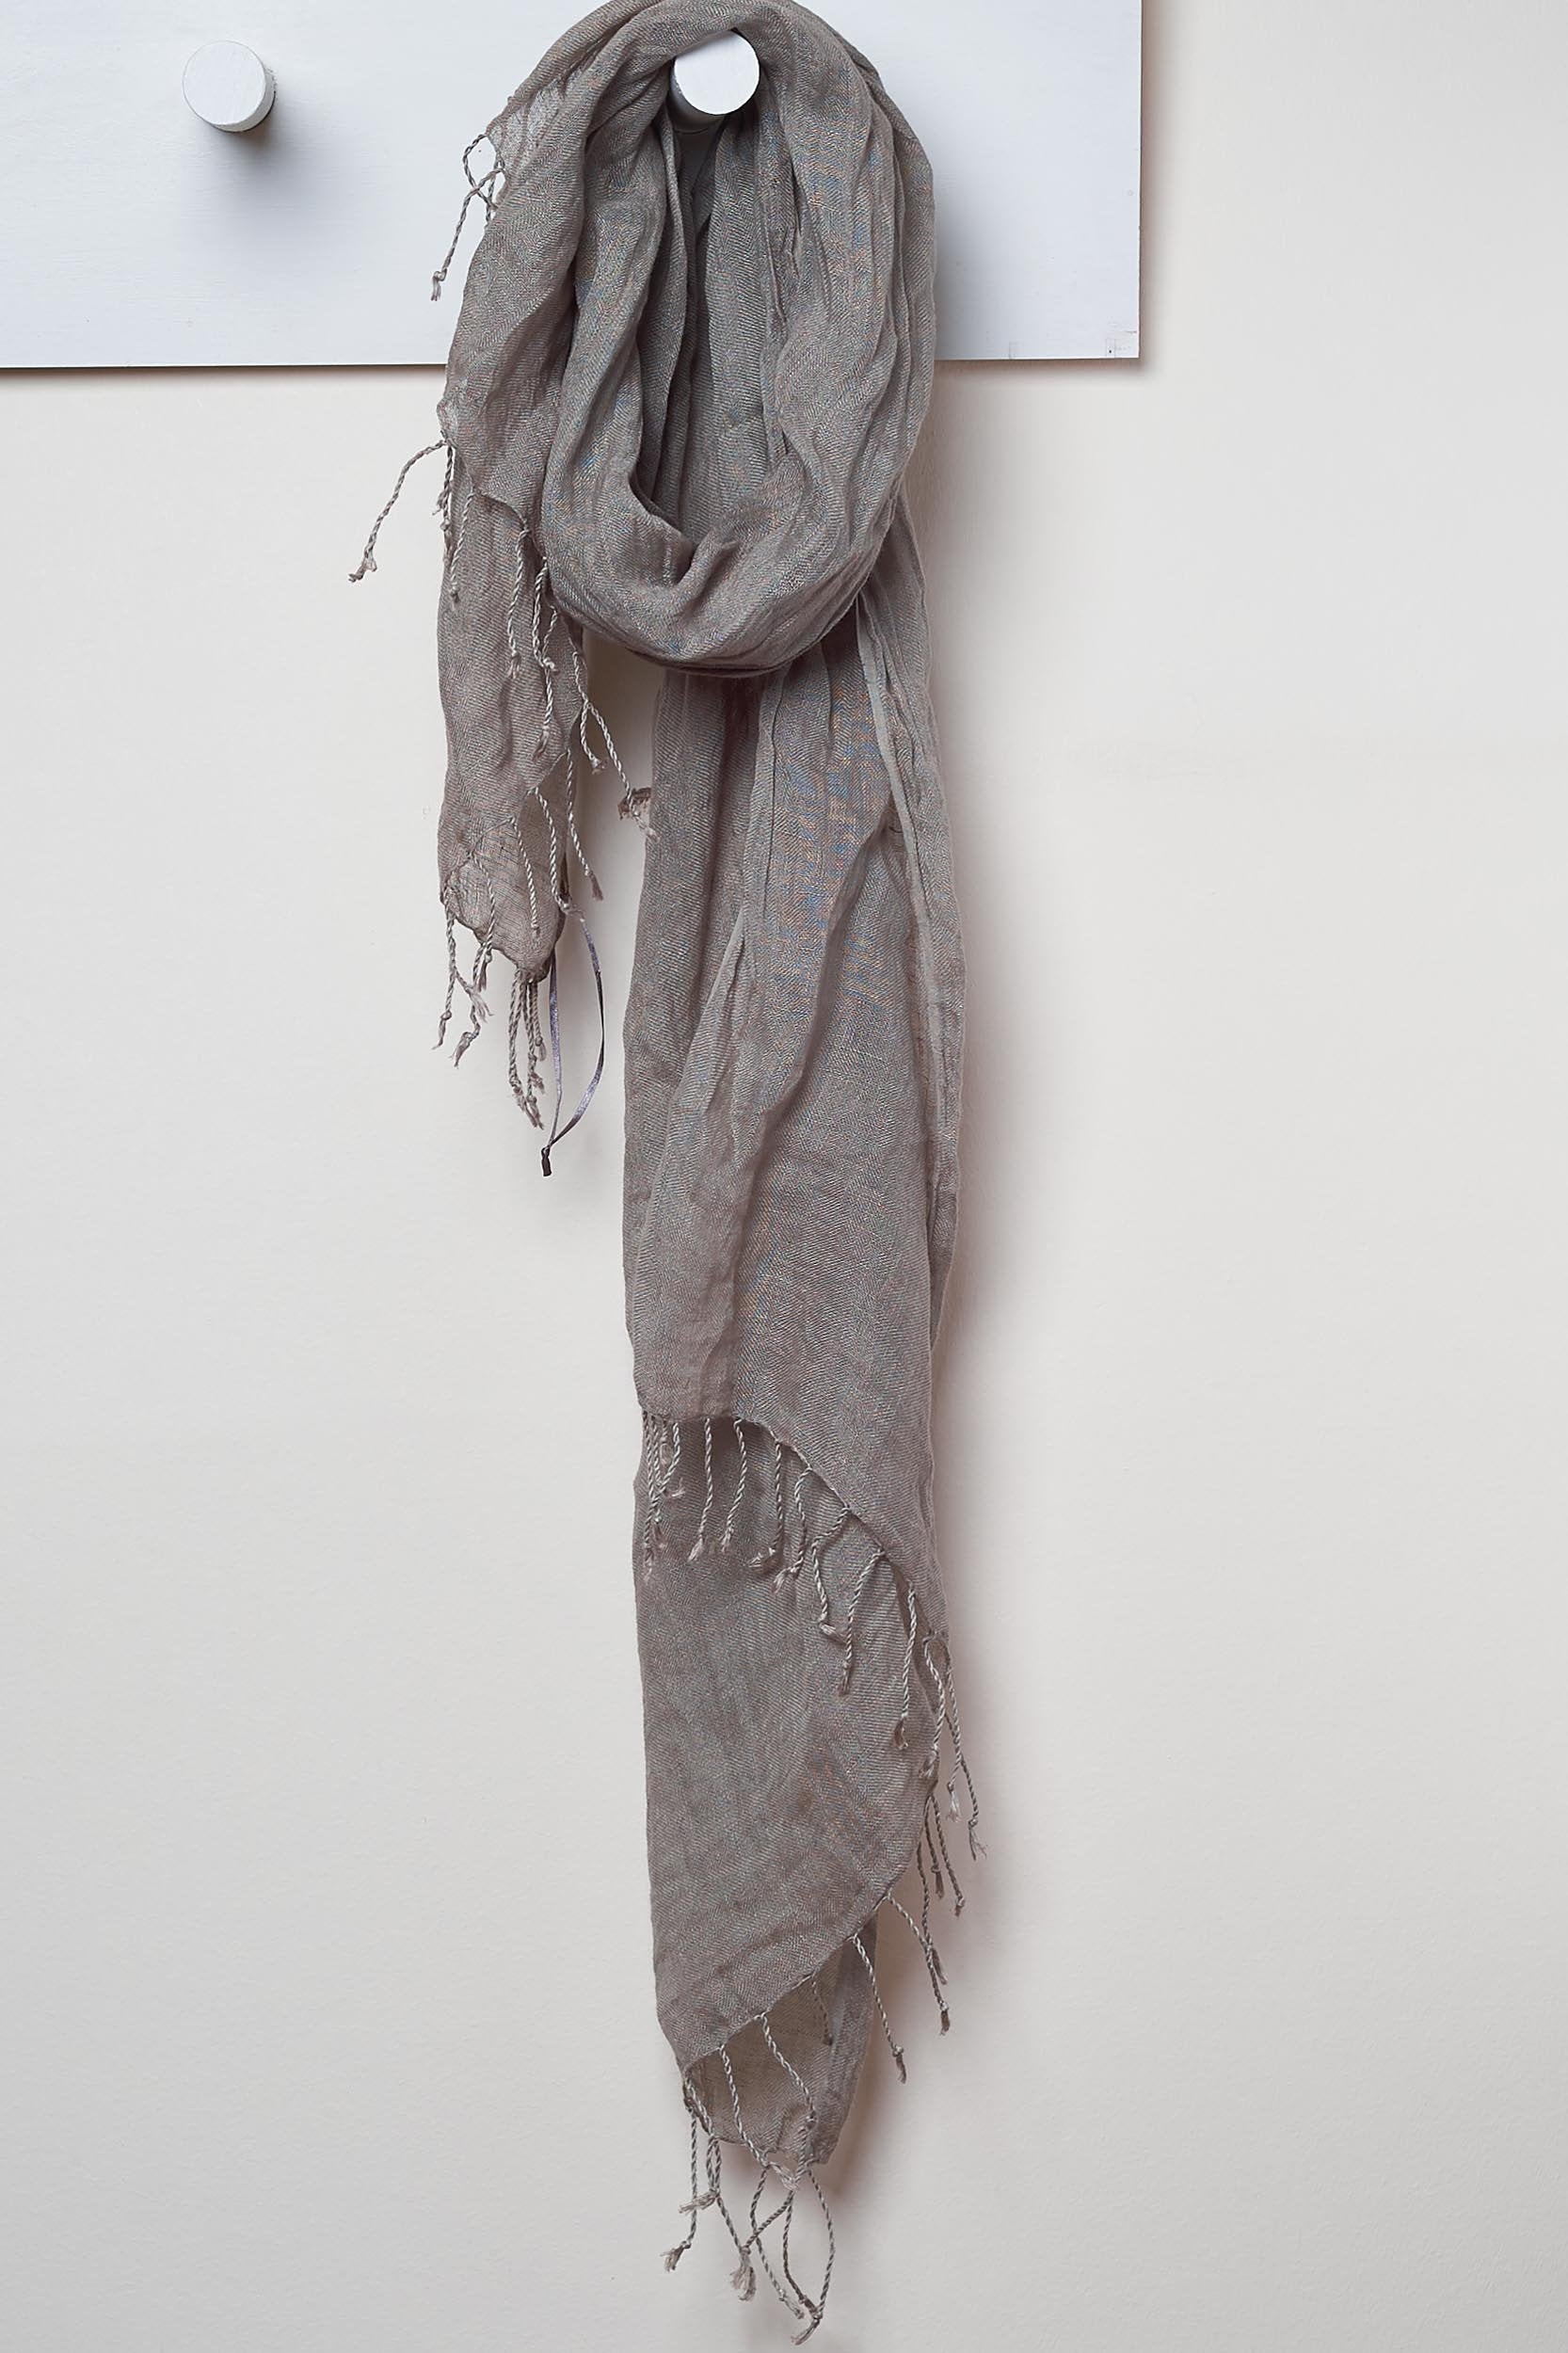 Jungle Moss linen Scarf. looped around a hook detailing the linen texture and thin tassels tied at the short edges of the scarf.